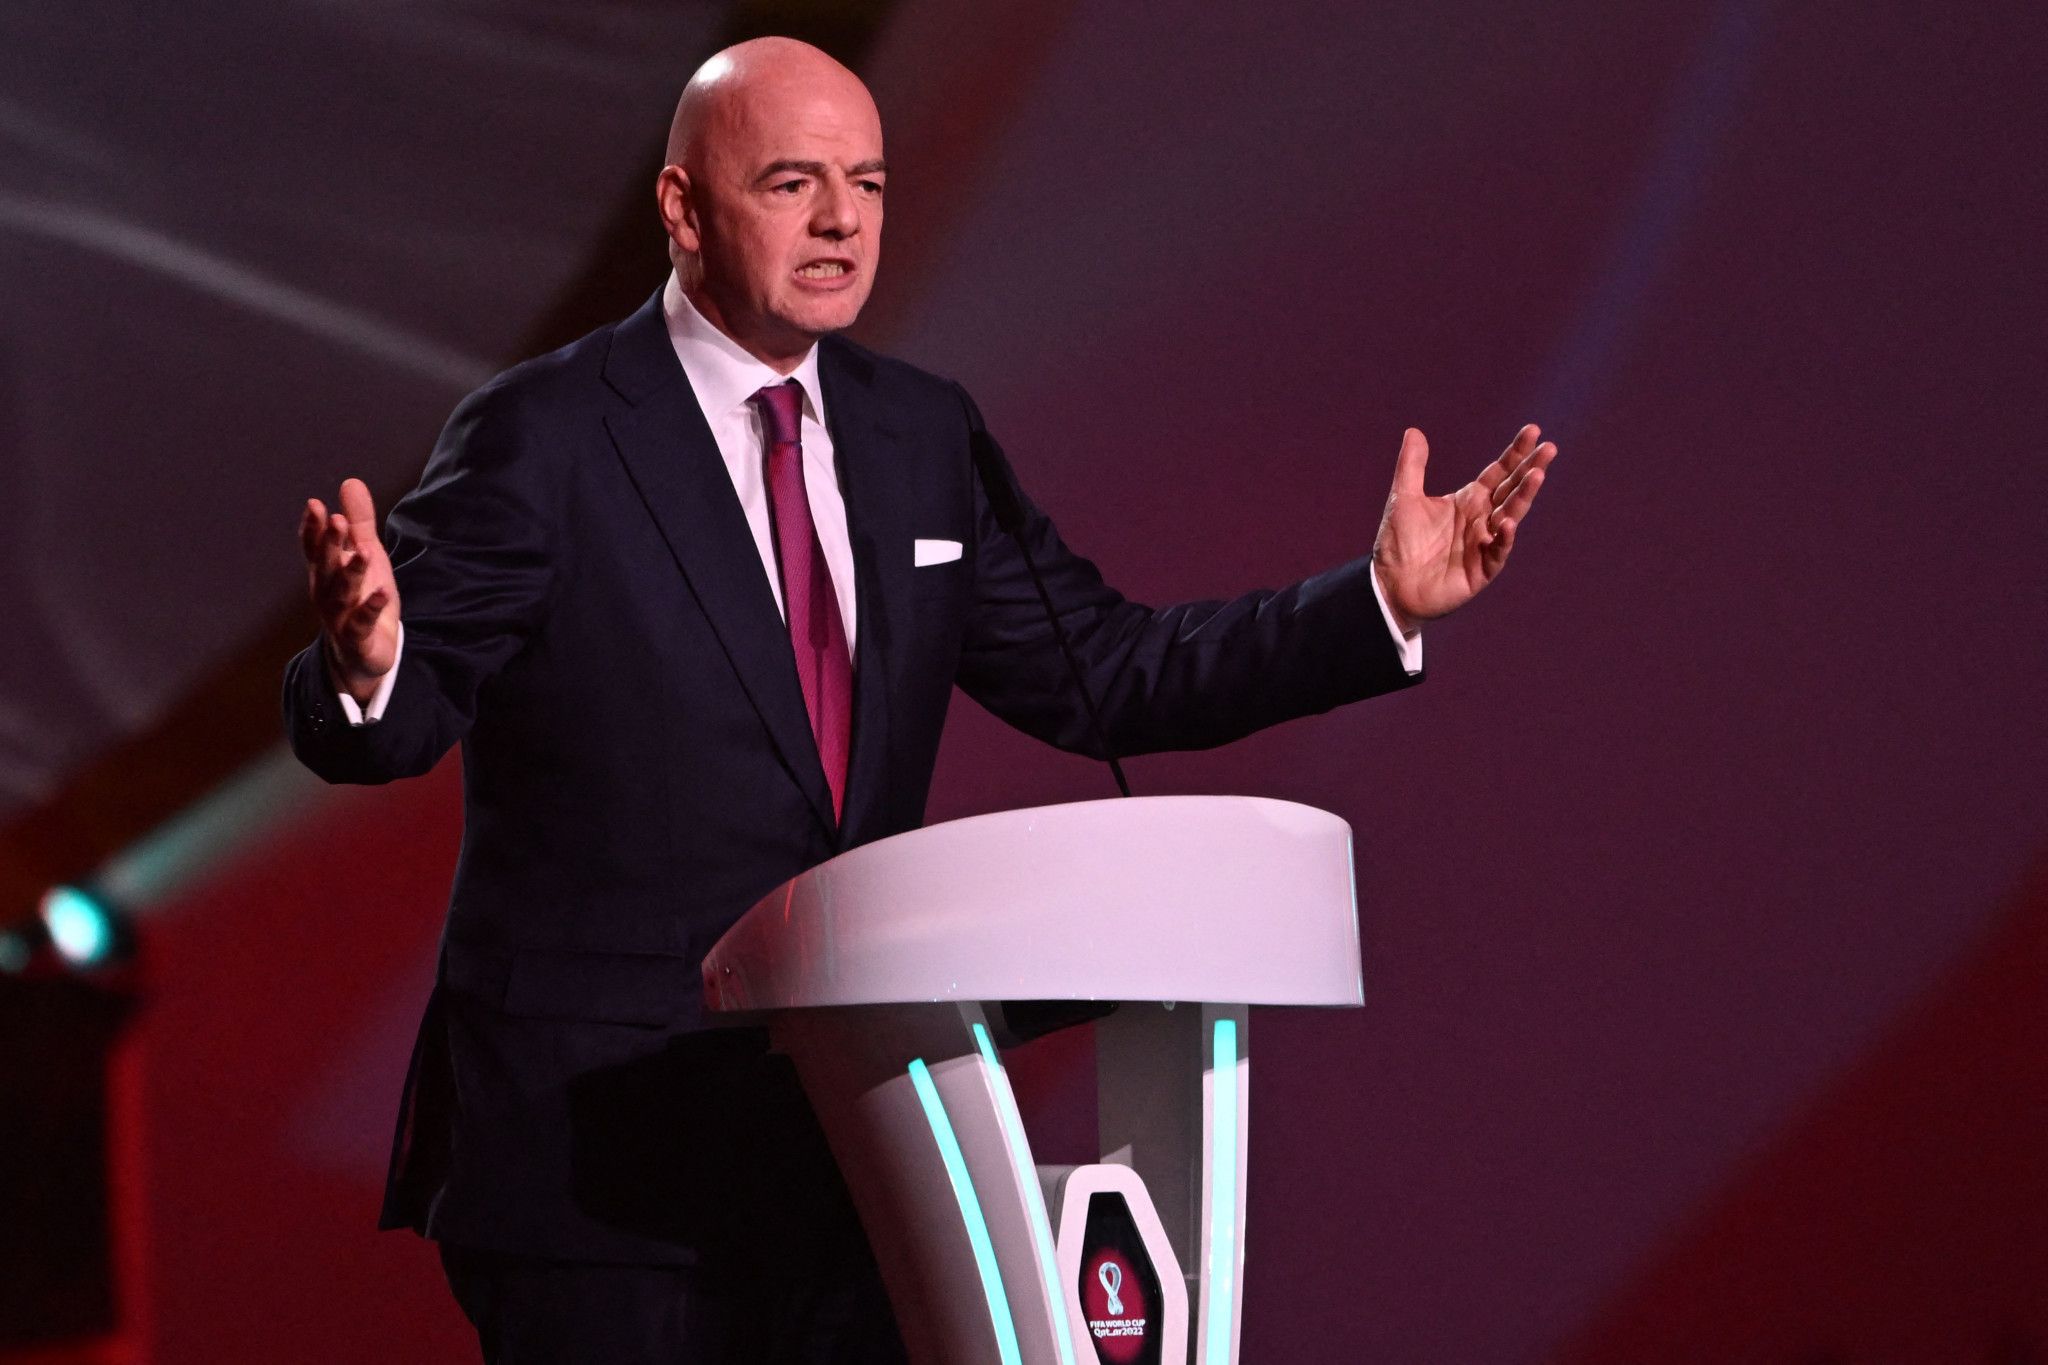 FIFA President Gianni Infantino opened the draw for the 2022 FIFA World Cup in Qatar ©Getty Images